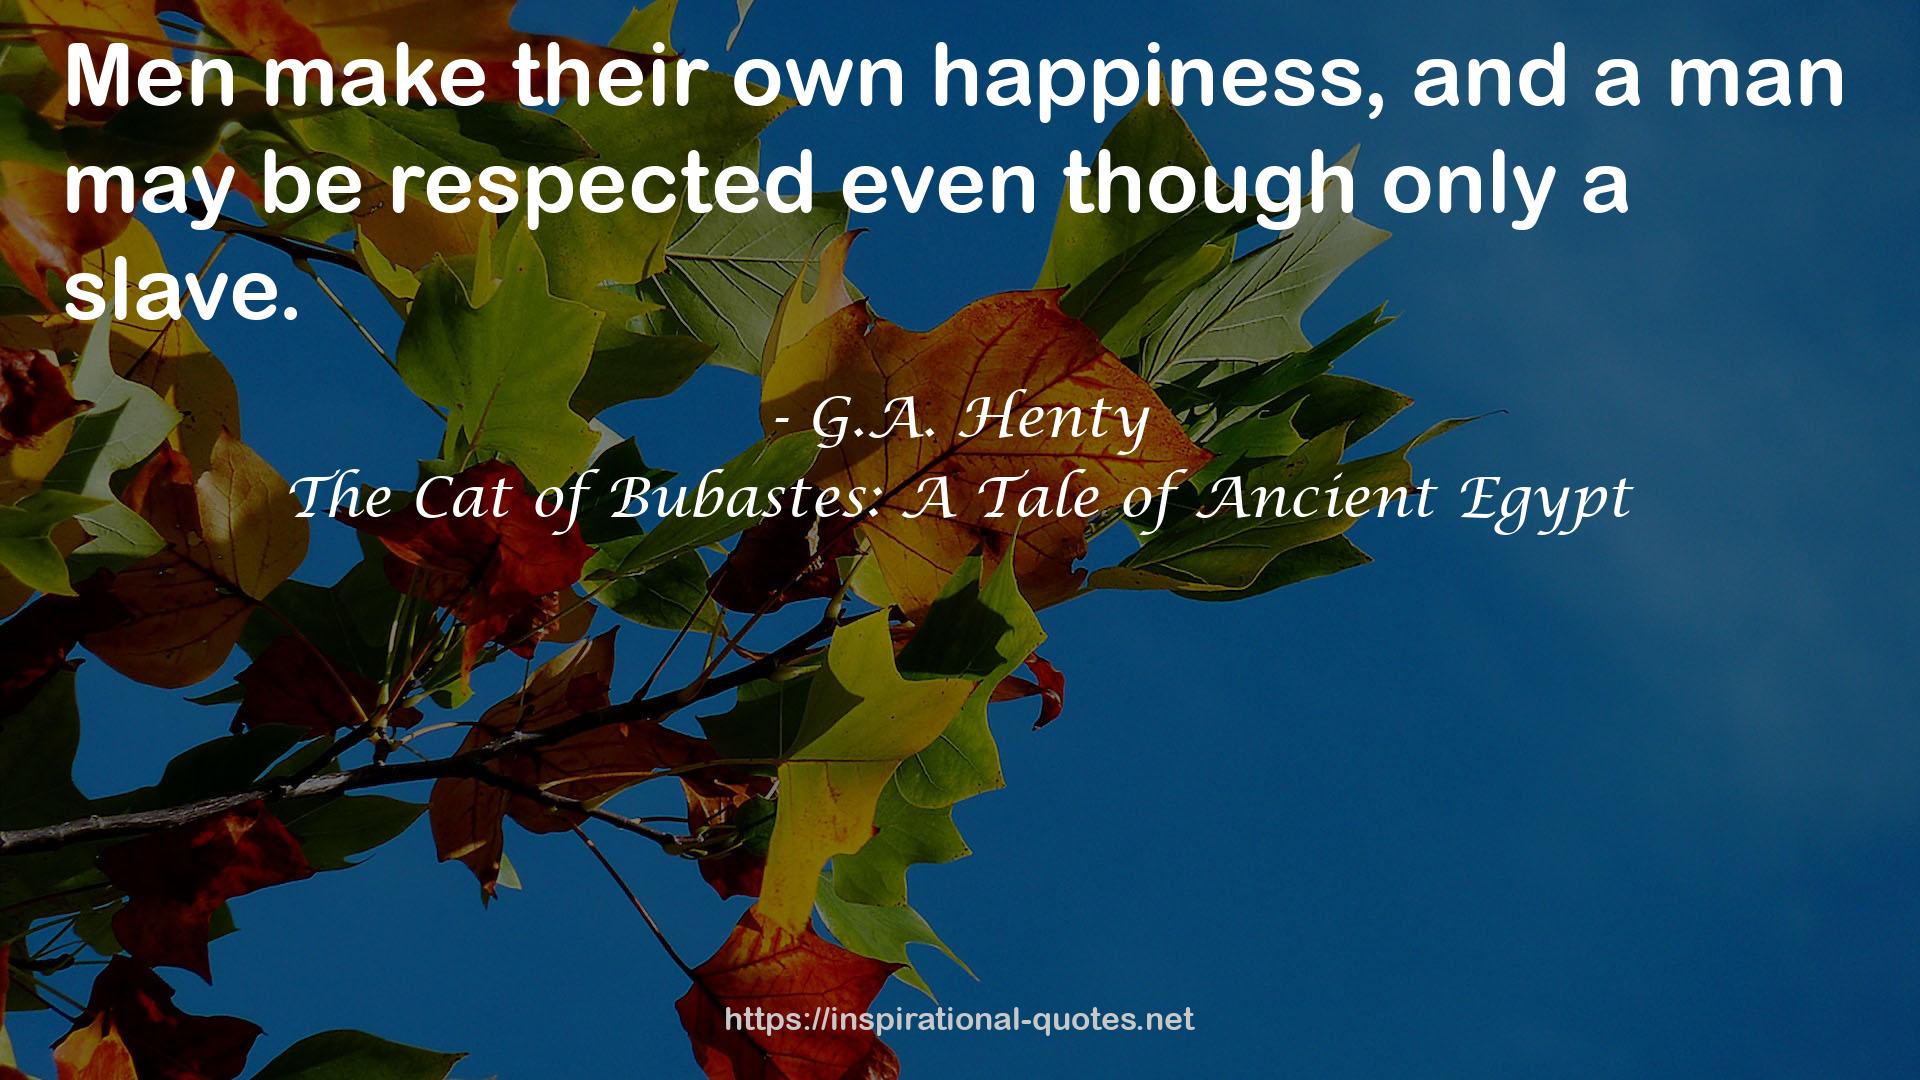 The Cat of Bubastes: A Tale of Ancient Egypt QUOTES